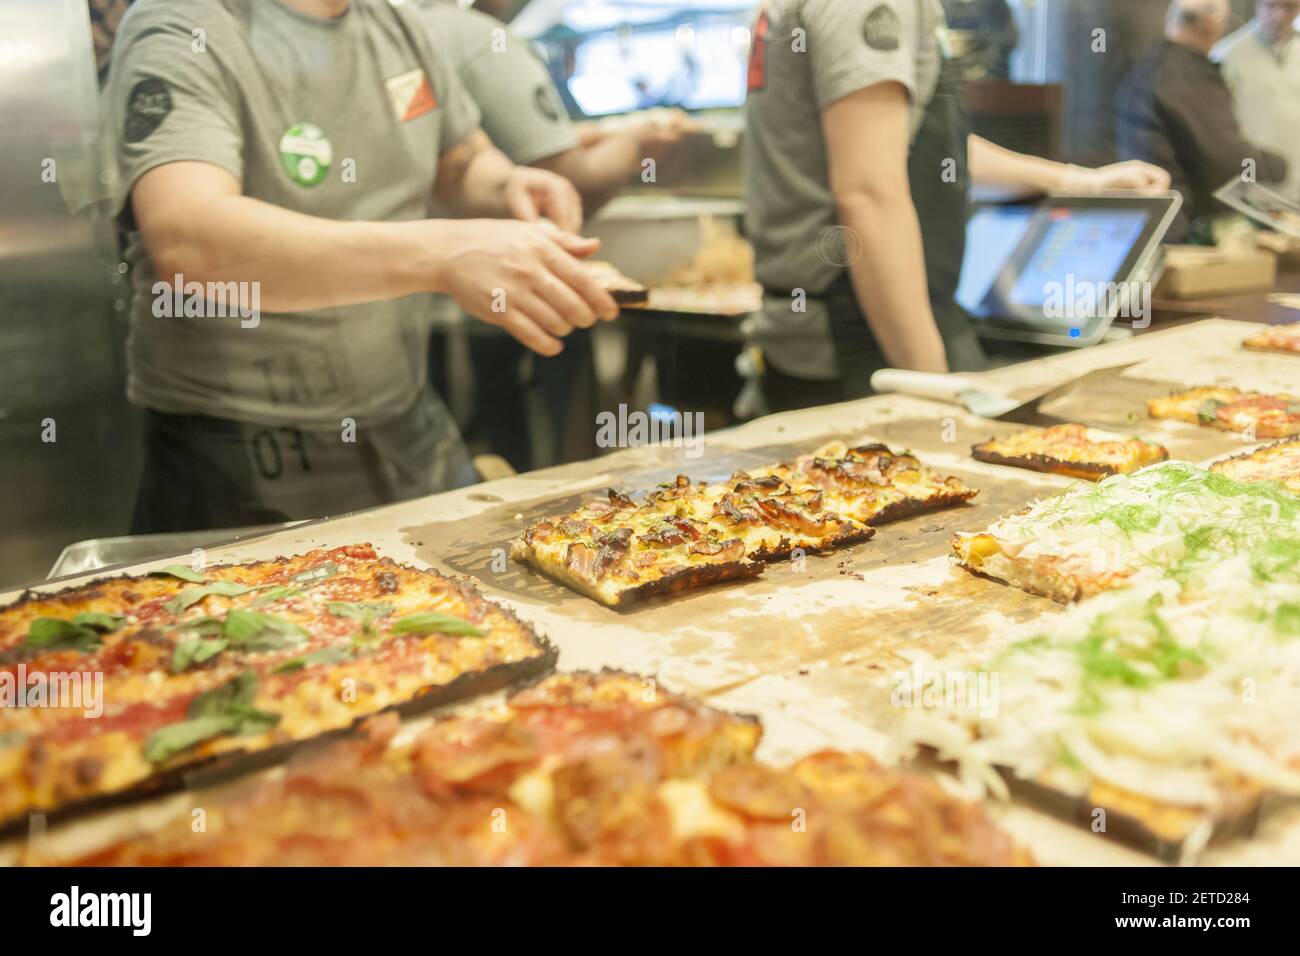 https://c8.alamy.com/comp/2ETD284/detroit-style-pizza-in-the-new-whole-foods-market-opposite-bryant-park-in-new-york-on-opening-day-saturday-january-28-2017-the-store-in-midtown-manhattan-is-the-chains-11th-store-to-open-in-the-city-the-store-has-a-large-selection-of-prepared-foods-from-a-diverse-group-of-vendors-inside-the-store-photo-by-richard-b-levine-please-use-credit-from-credit-field-2ETD284.jpg